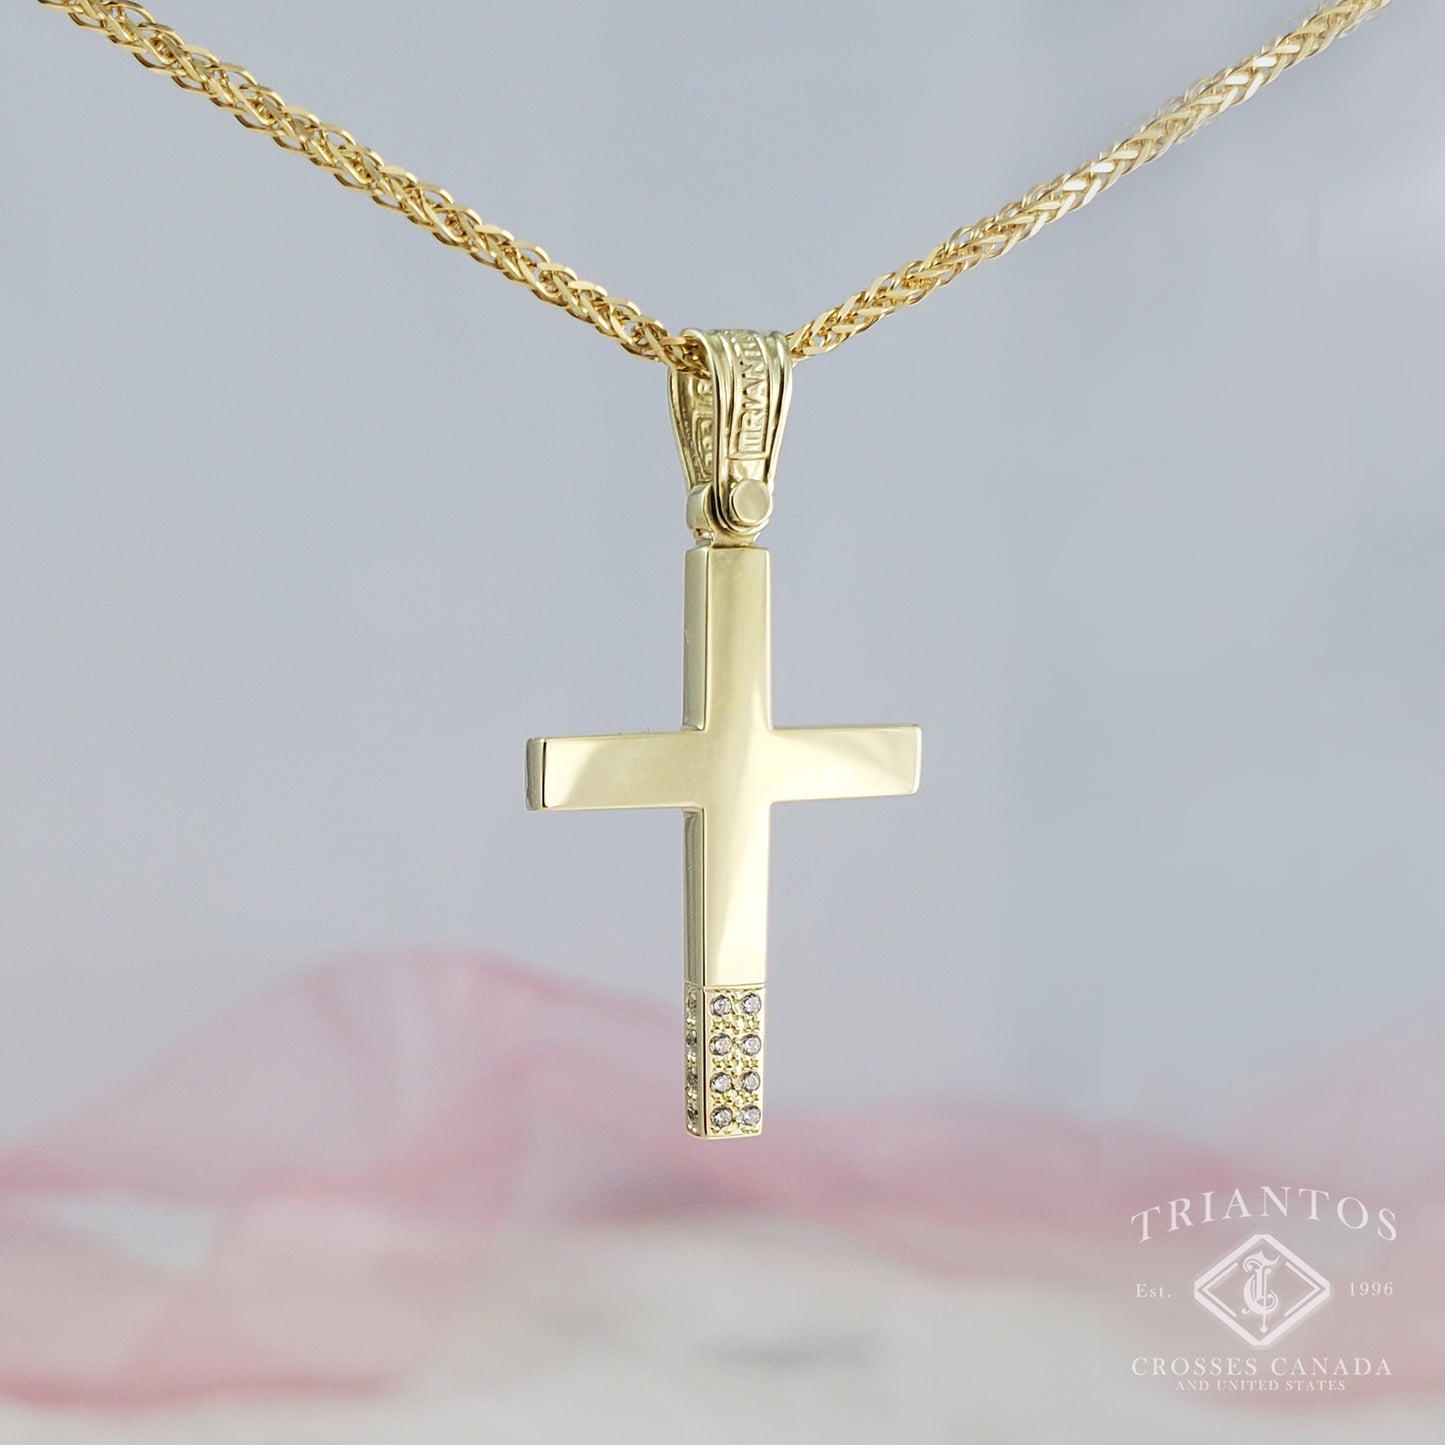 Modern Cross with a total of 16 sparkling Cubic Zirconia Stones on the bottom center and sides